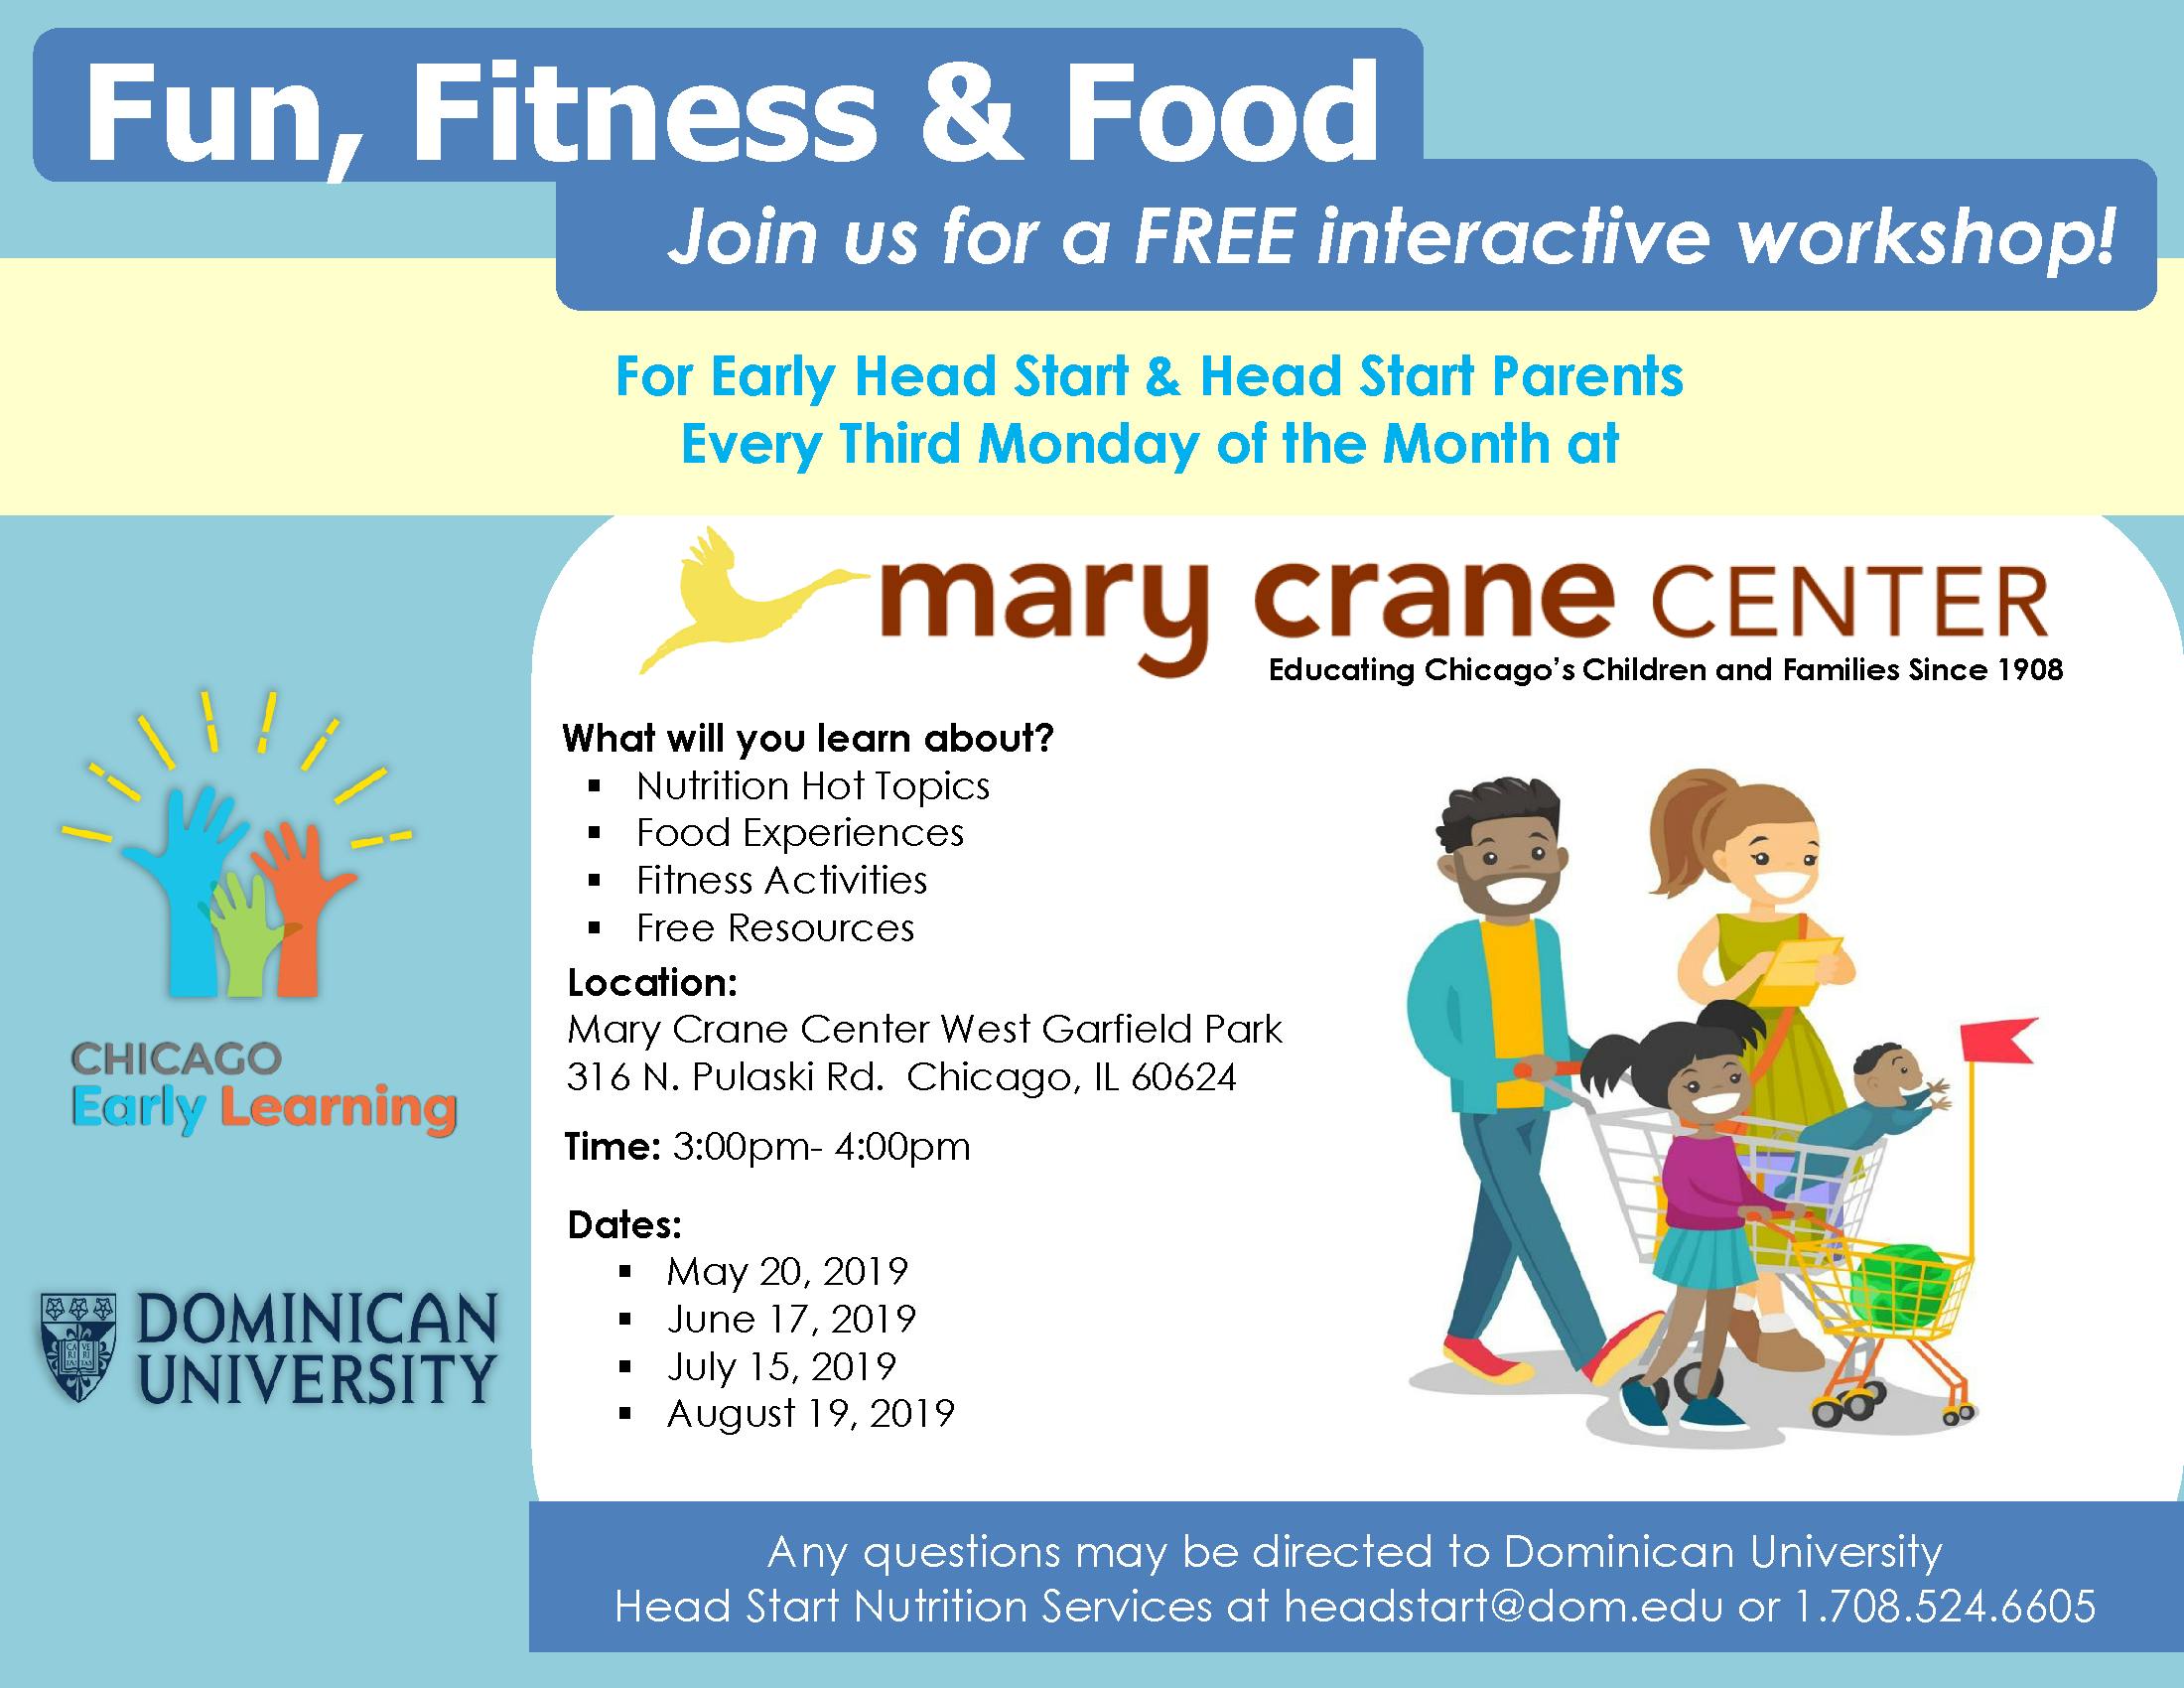 Fun, Fitness & Food! Join us for a Free Interactive Workshop! 